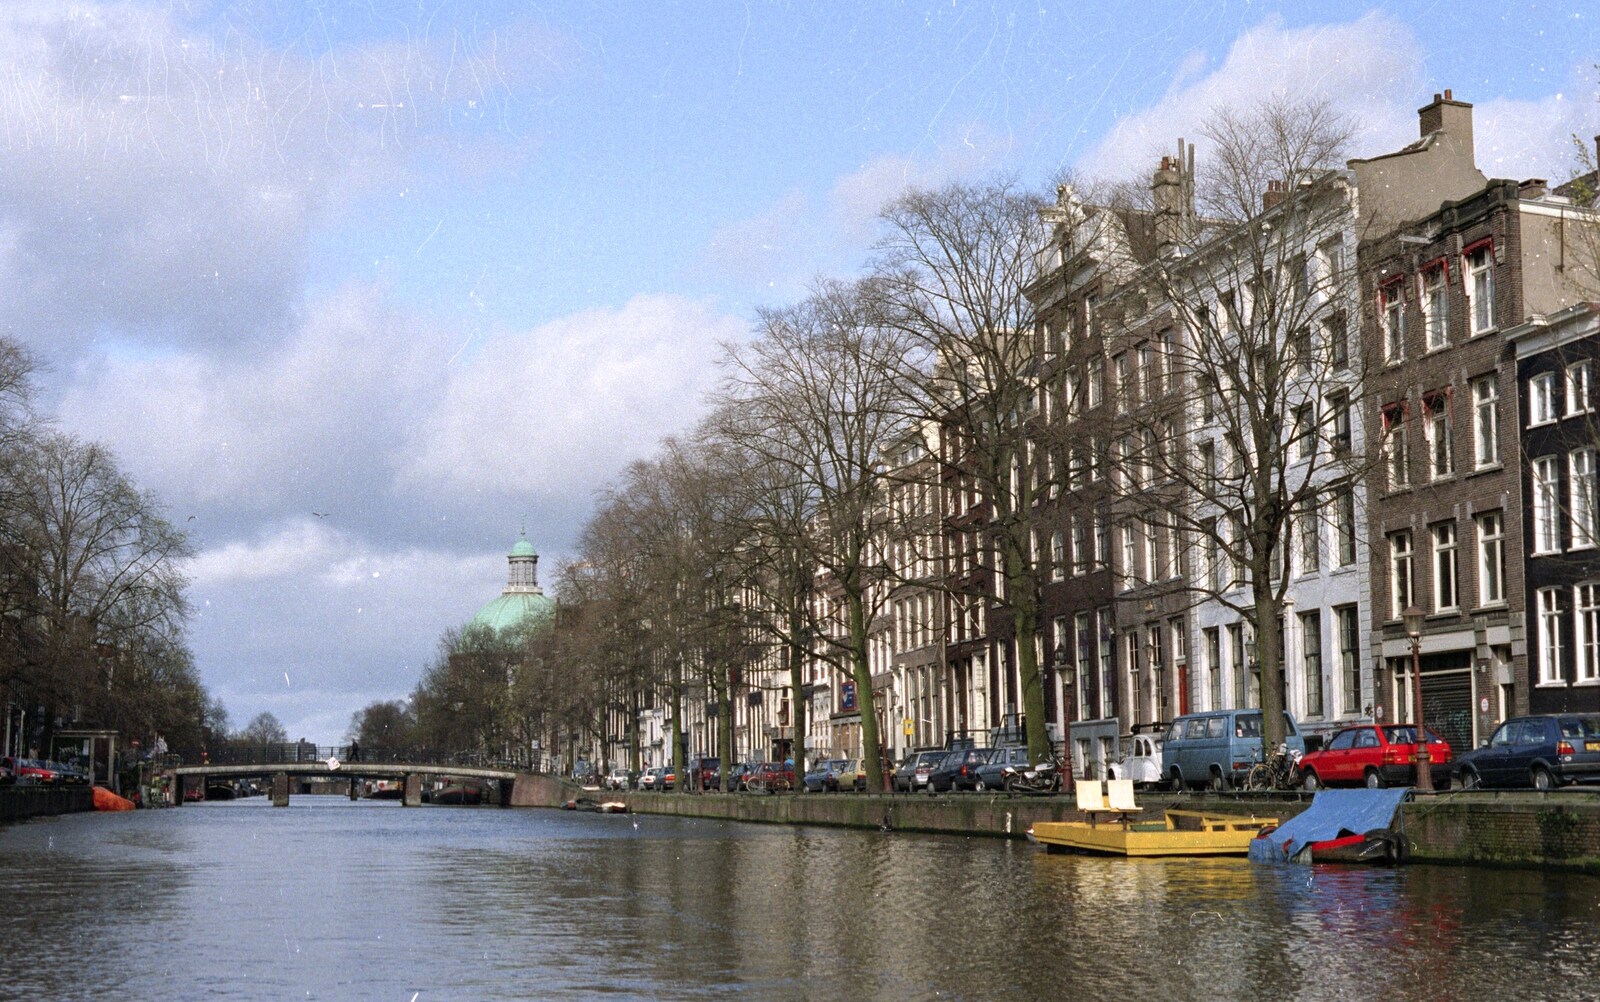 Out and About in Amsterdam, Hoorne, Vollendam and Edam, The Netherlands - 26th March 1992: A river scene